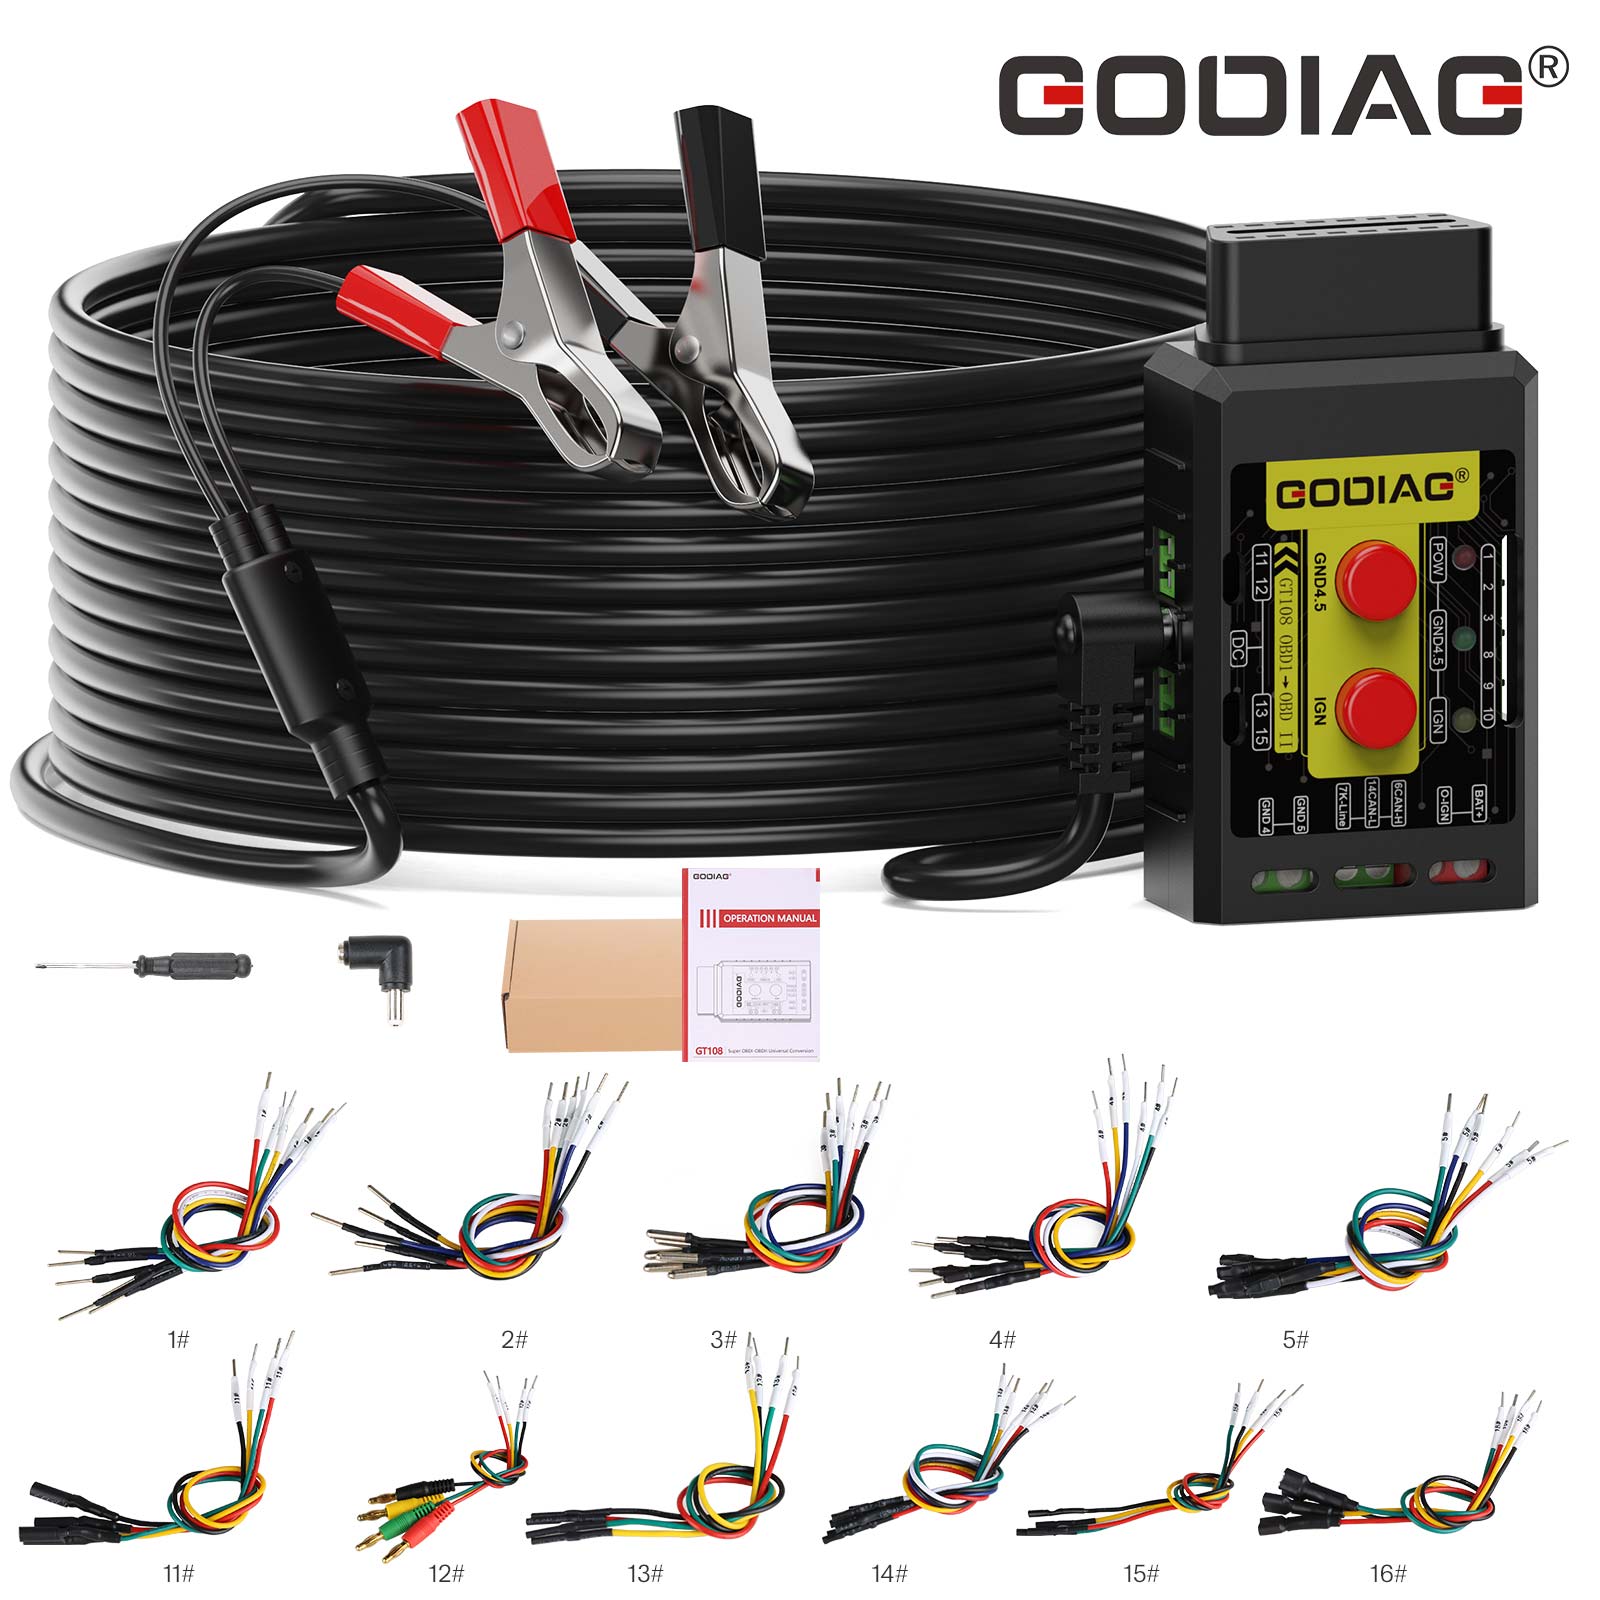 Godiag GT106 24V to 12V Heavy Duty Truck Adapter for Launch X431